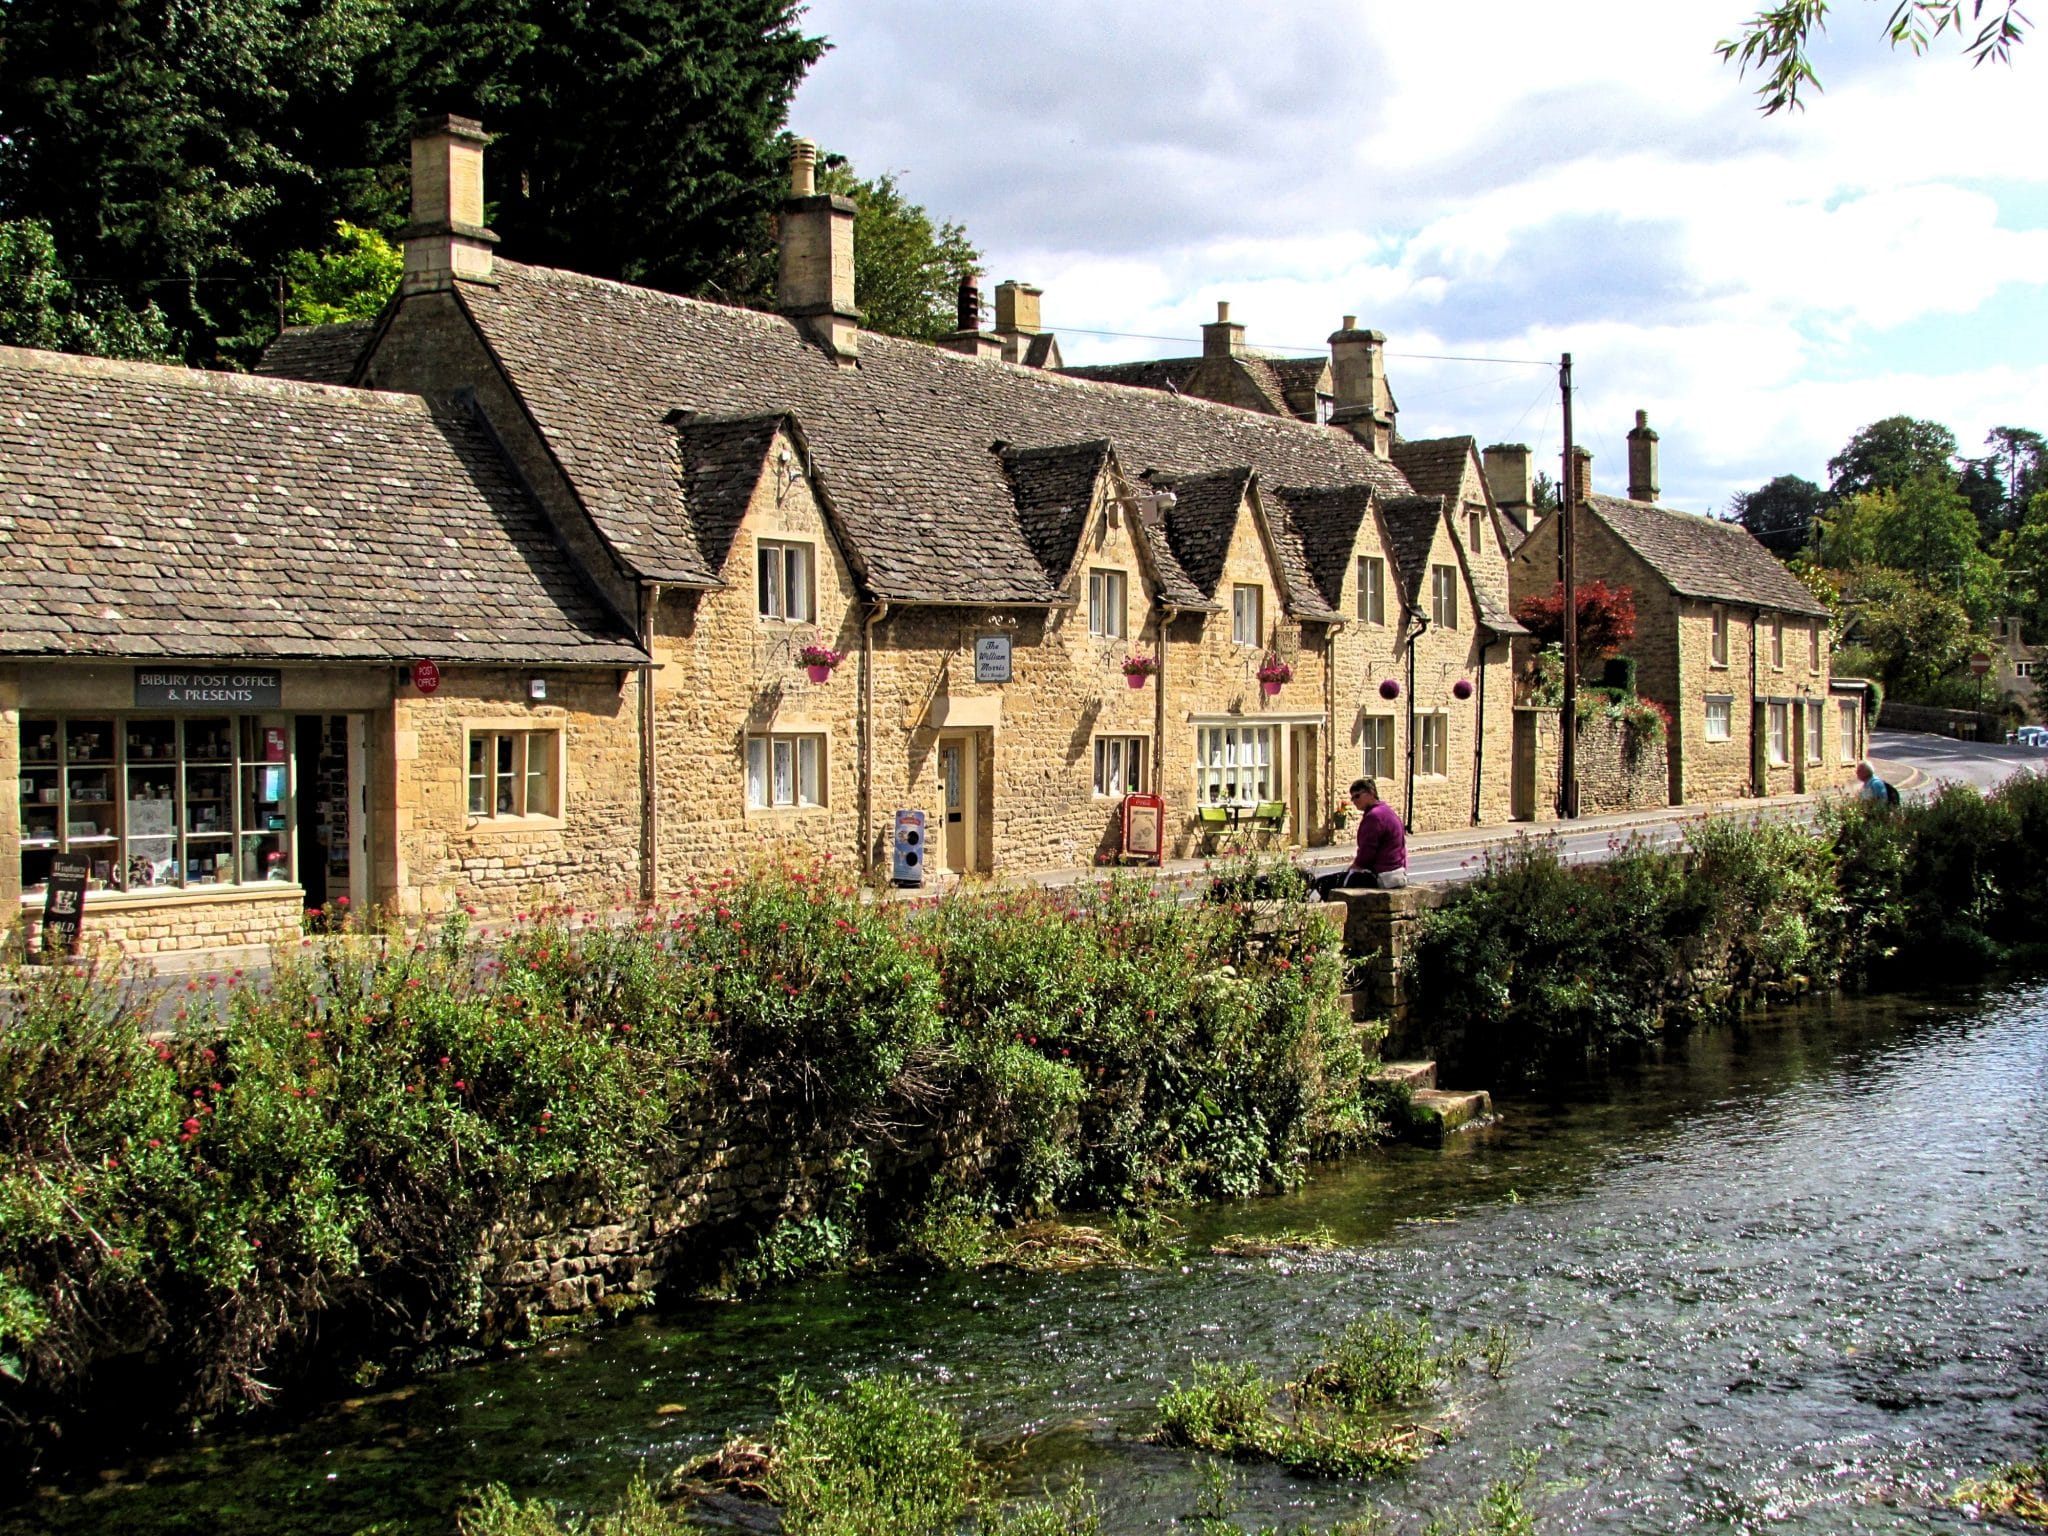 Some beautiful houses in The Cotswolds in England 